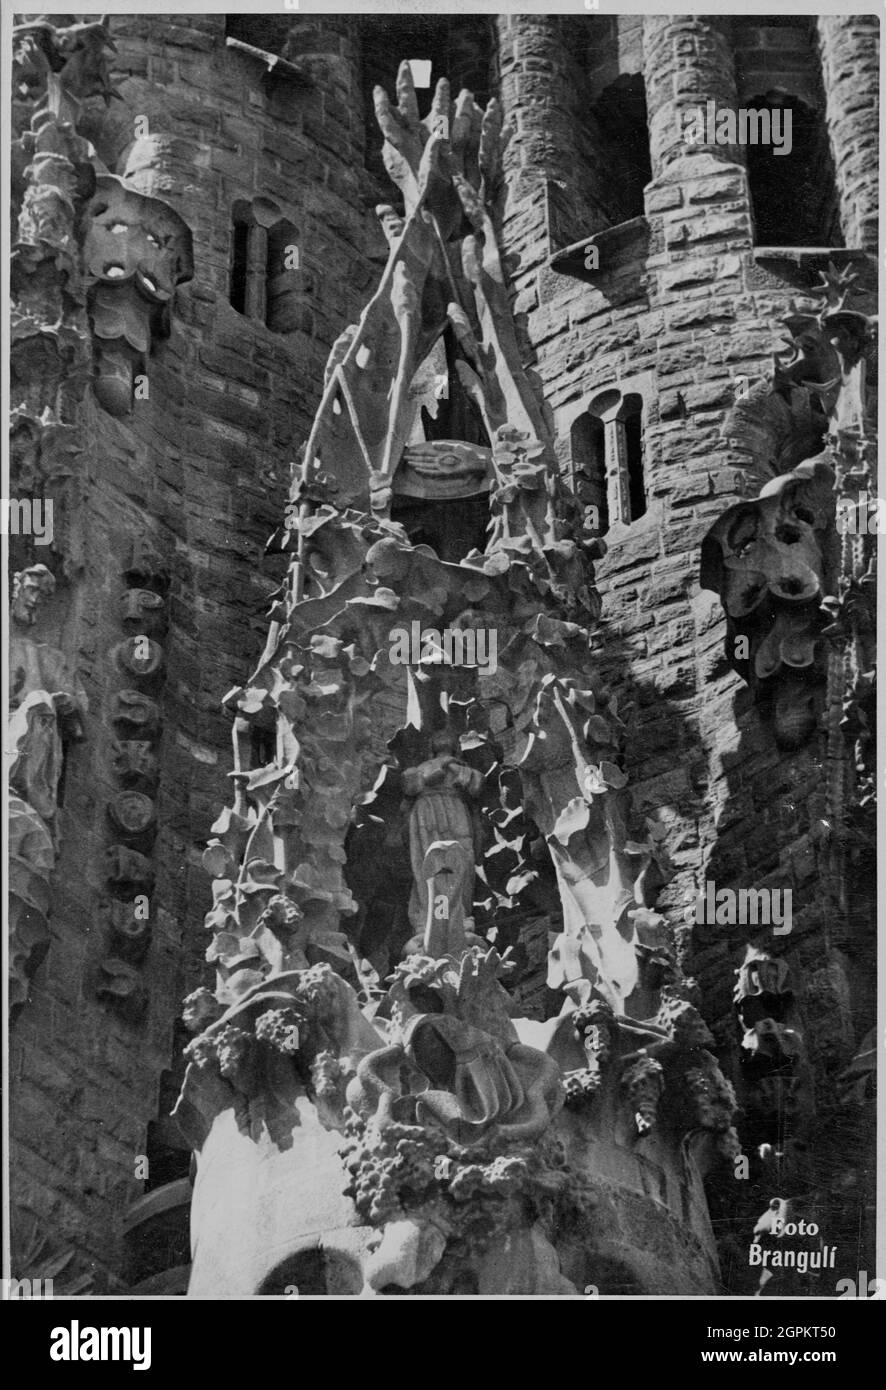 Sagrada Familia (Nativity Facade): portico of the Faith with the Immaculate Conception that is inside a crucible of three pipes that represent the Holy Trinity and on the summit there is the hand with the eye that sees everything as a symbol of Divine Providence, 1934. Author: JOAN MATAMALA FLOTATS. Stock Photo